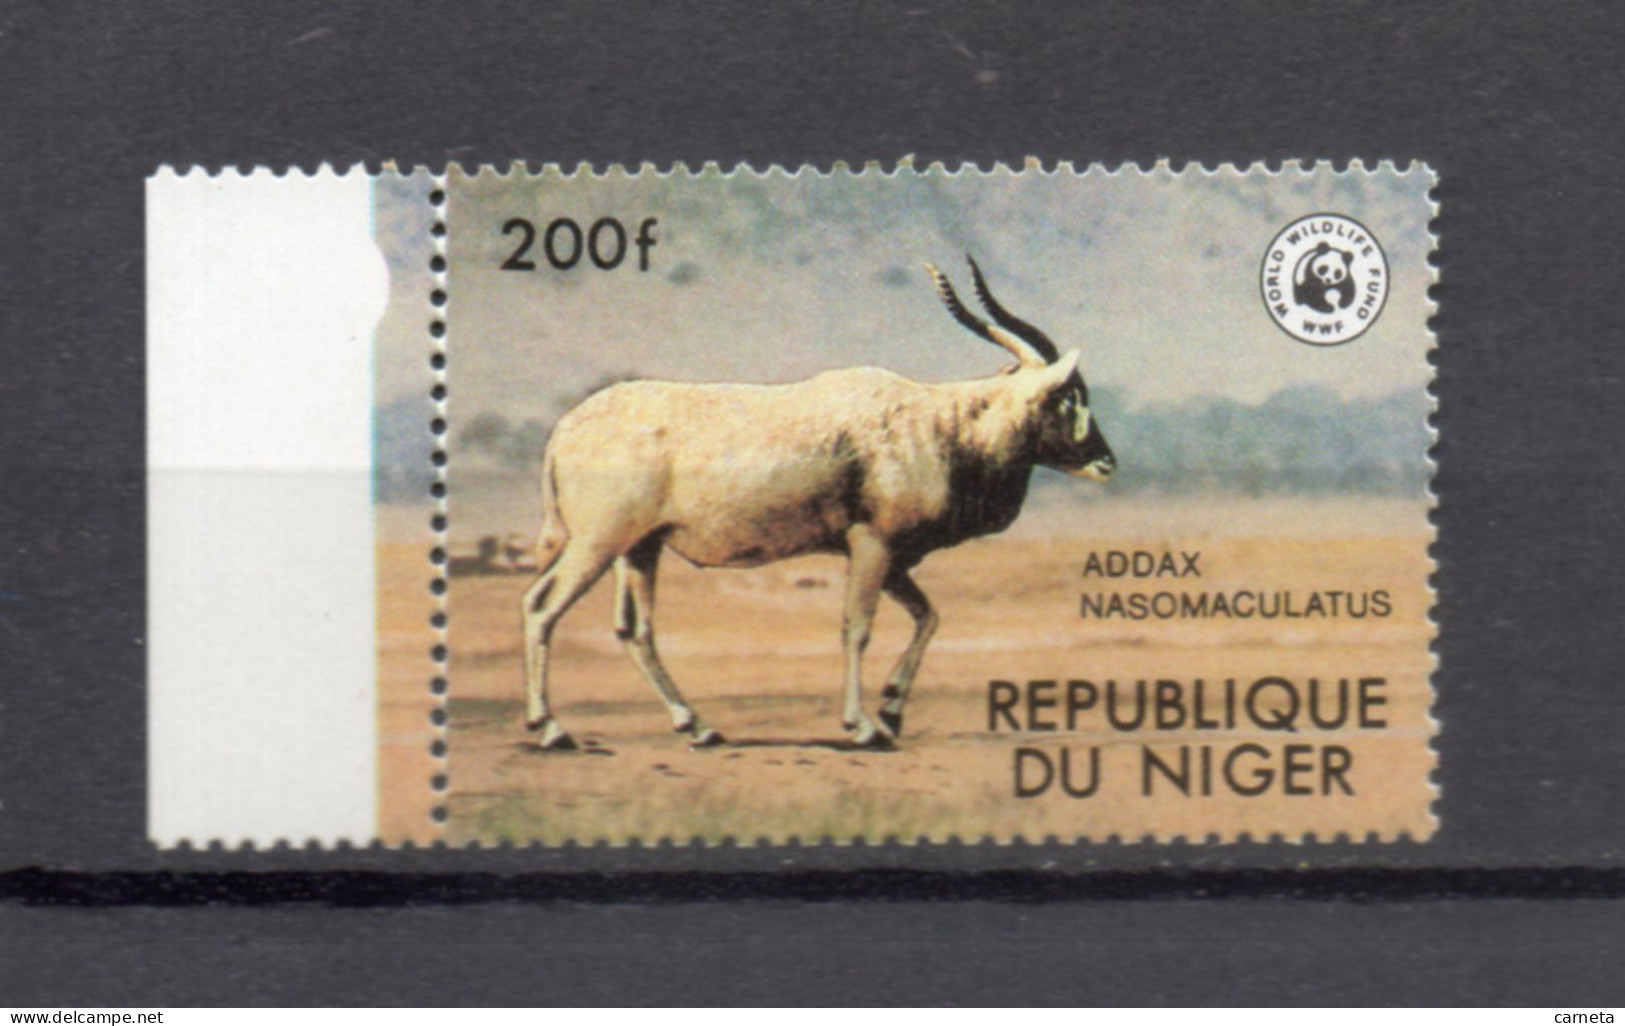 NIGER   N° 453    NEUF SANS CHARNIERE  COTE 10.00€    ANIMAUX FAUNE - Niger (1960-...)